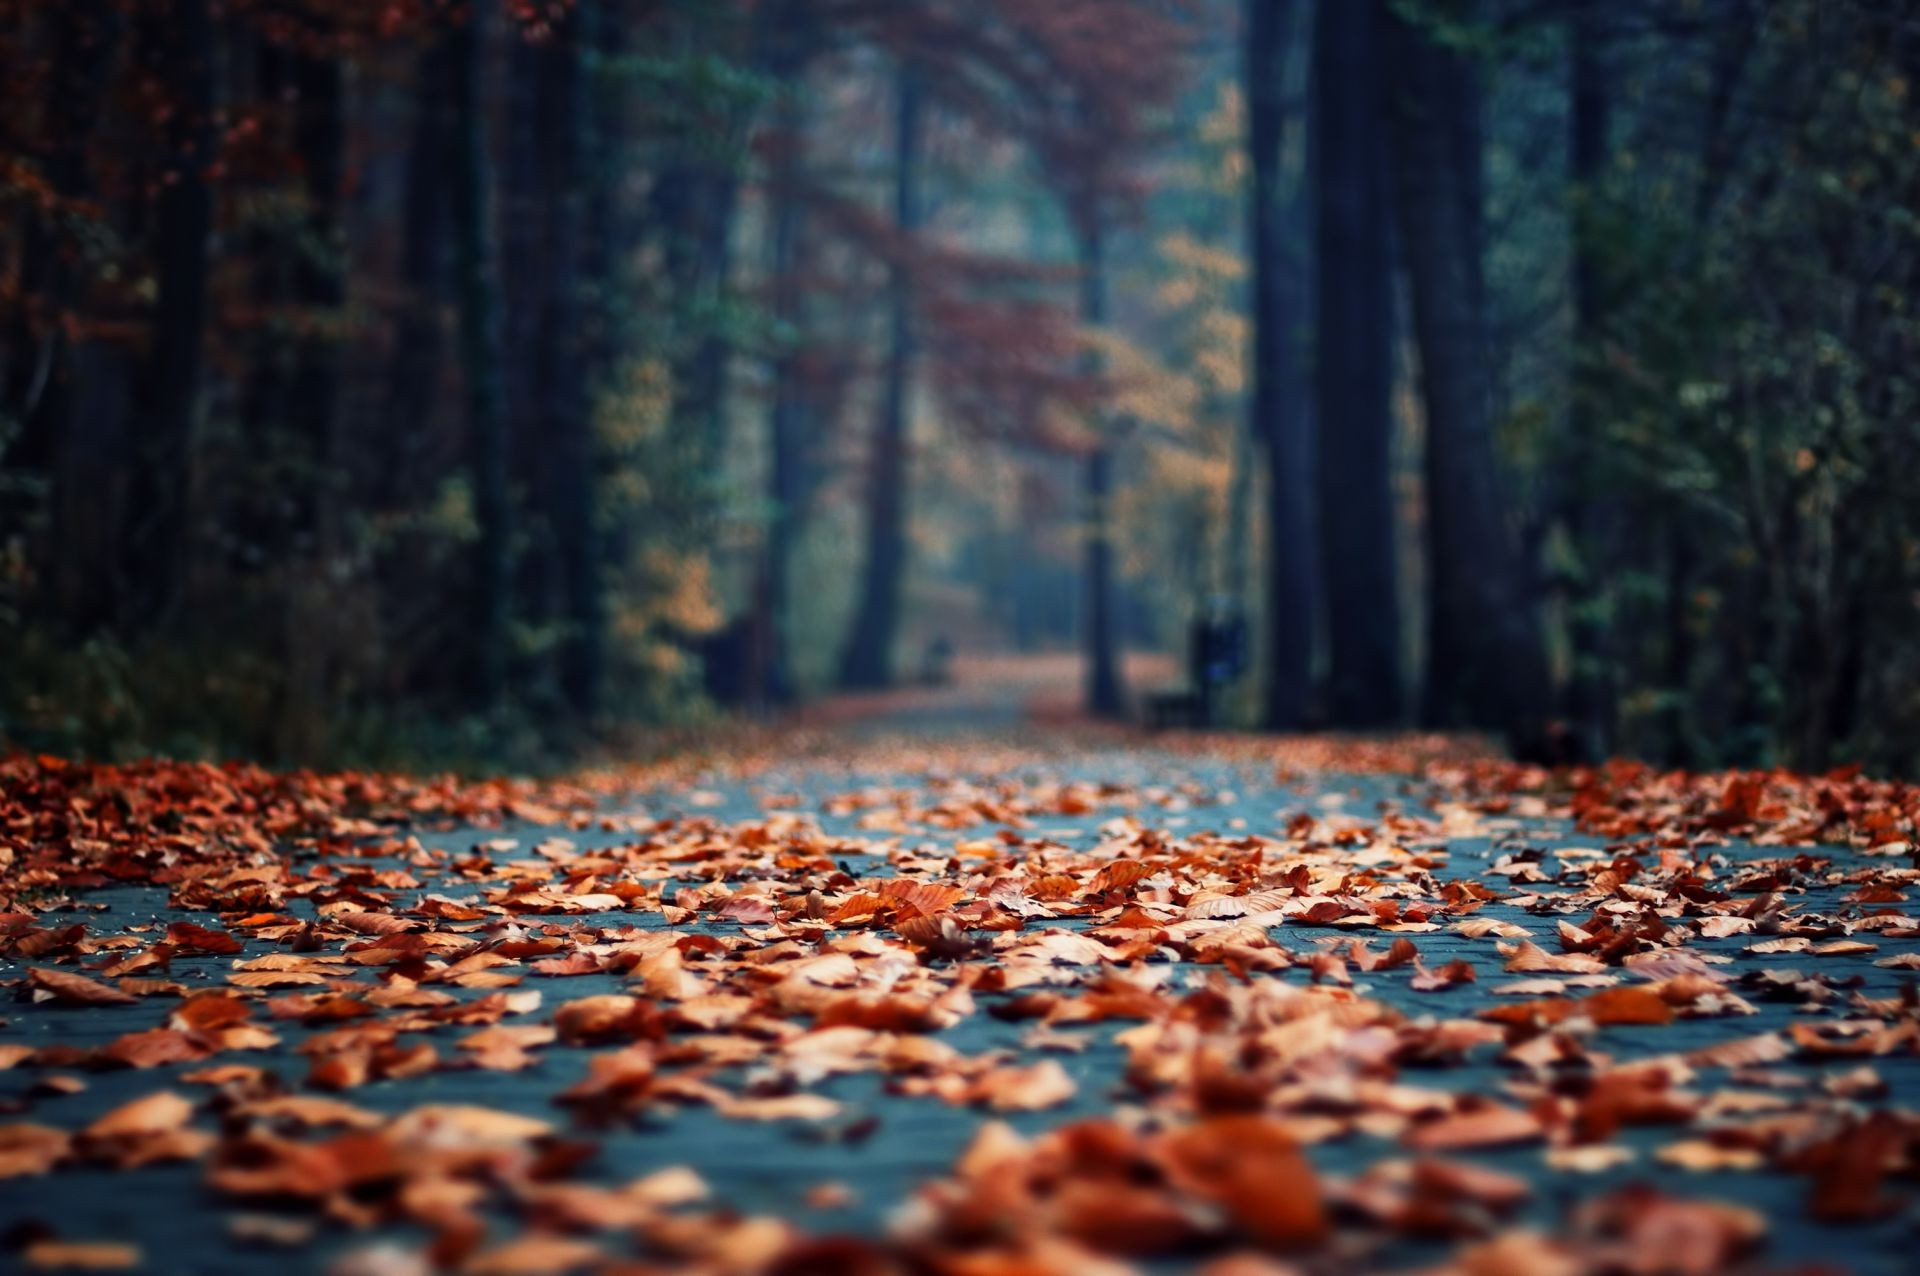 The focus of the morning leaves the Park Fall foliage bokeh the asphalt